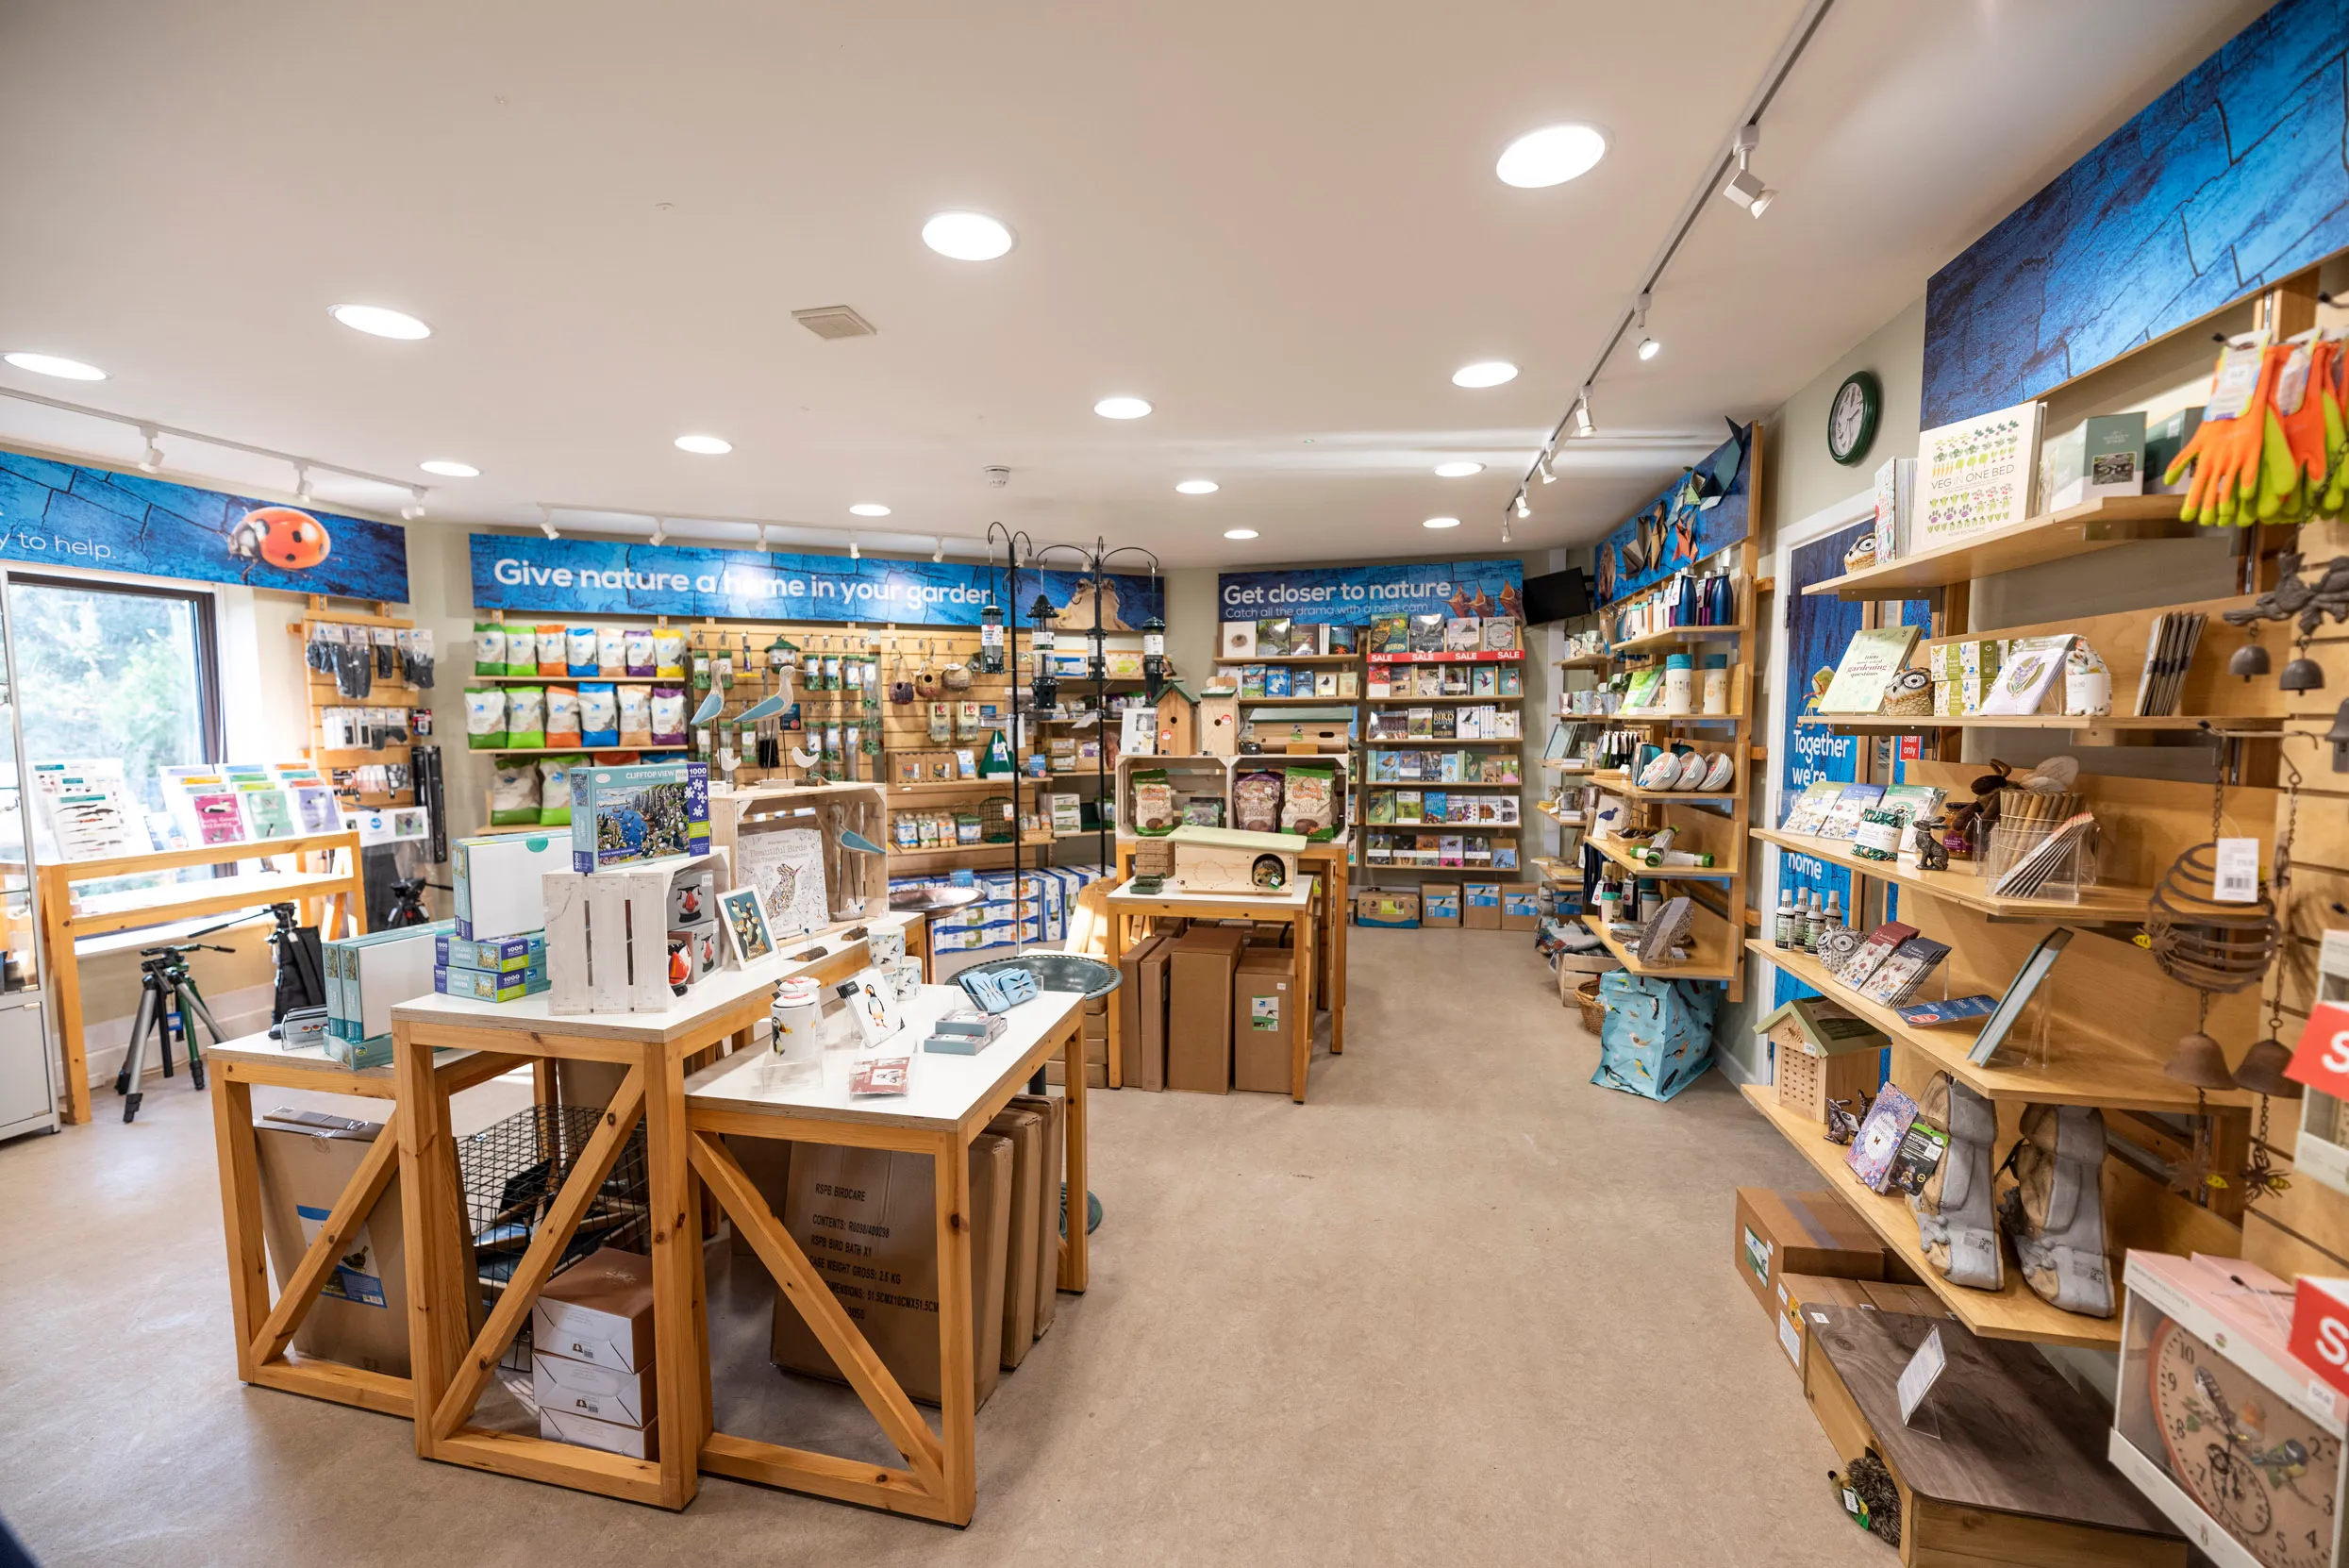 The view of the inside of an RSPB shop, filled with wooden displays.